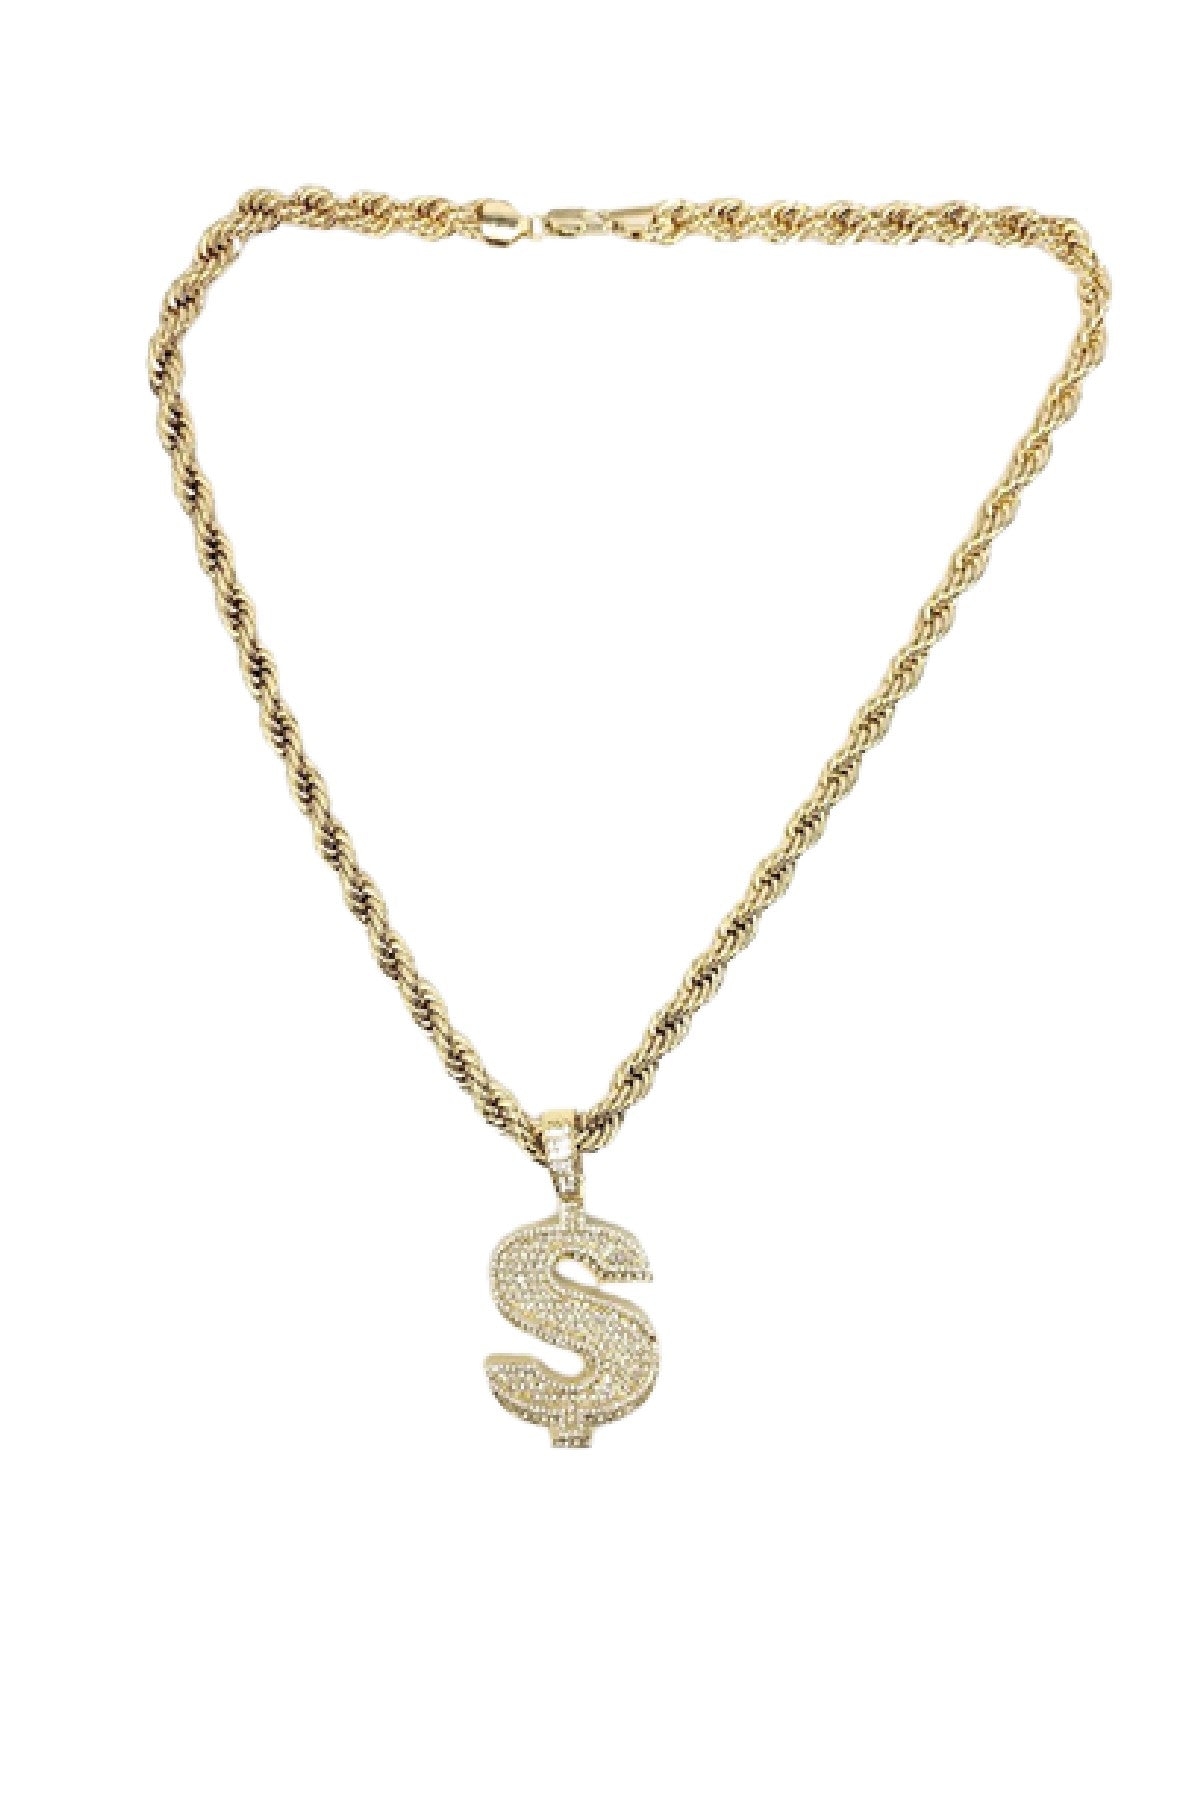 HIP HOP ICED OUT DOLLAR PENDANT ROPE CHAIN